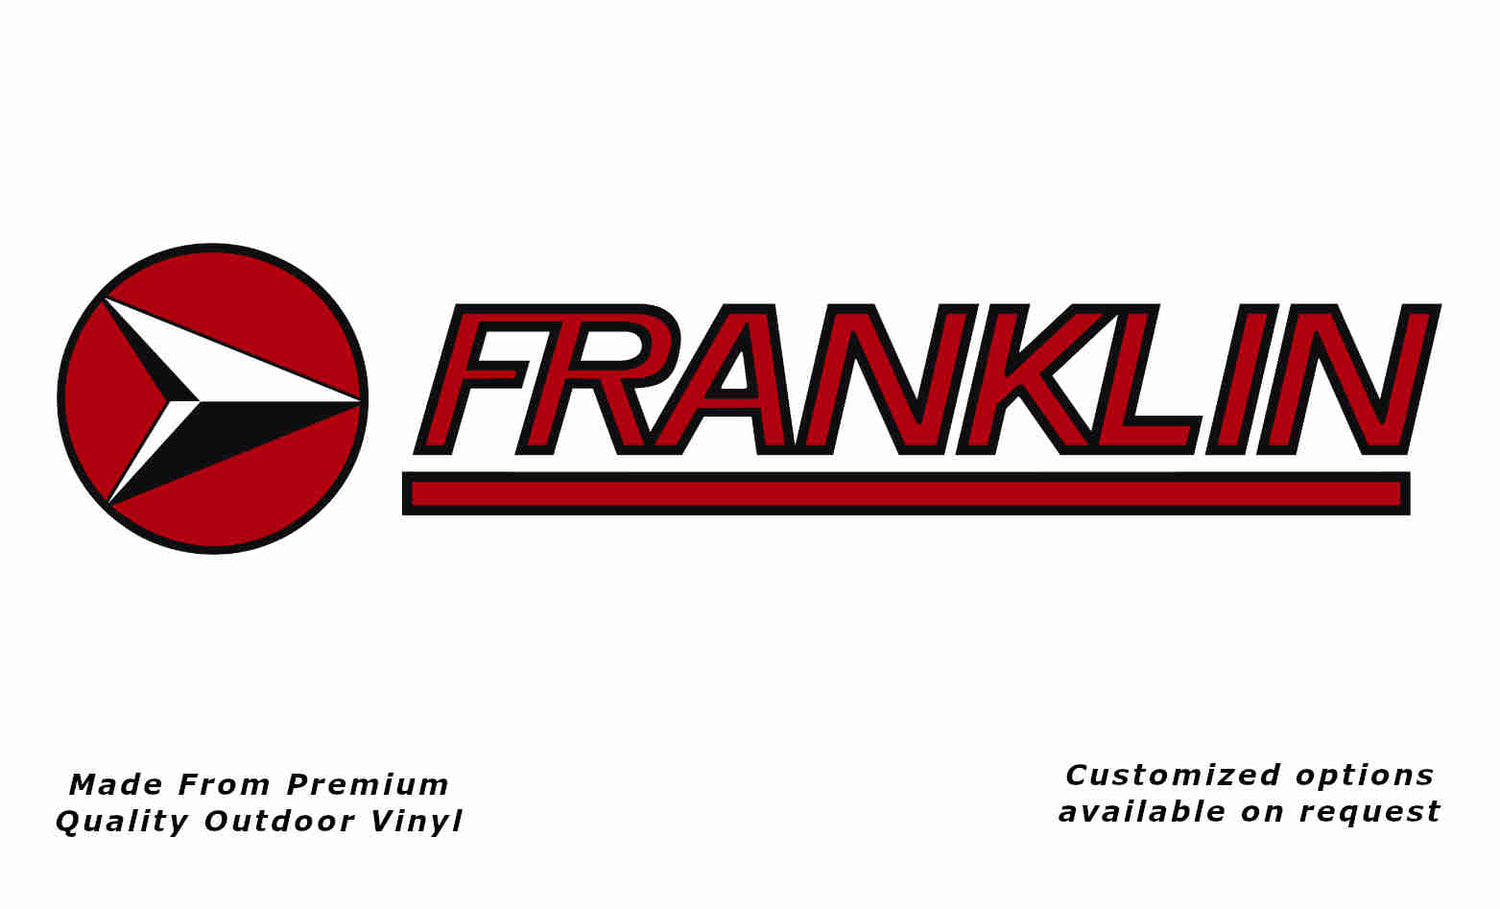 Franklin arrowhead v1 caravan replacement vinyl decal sticker in black and red.